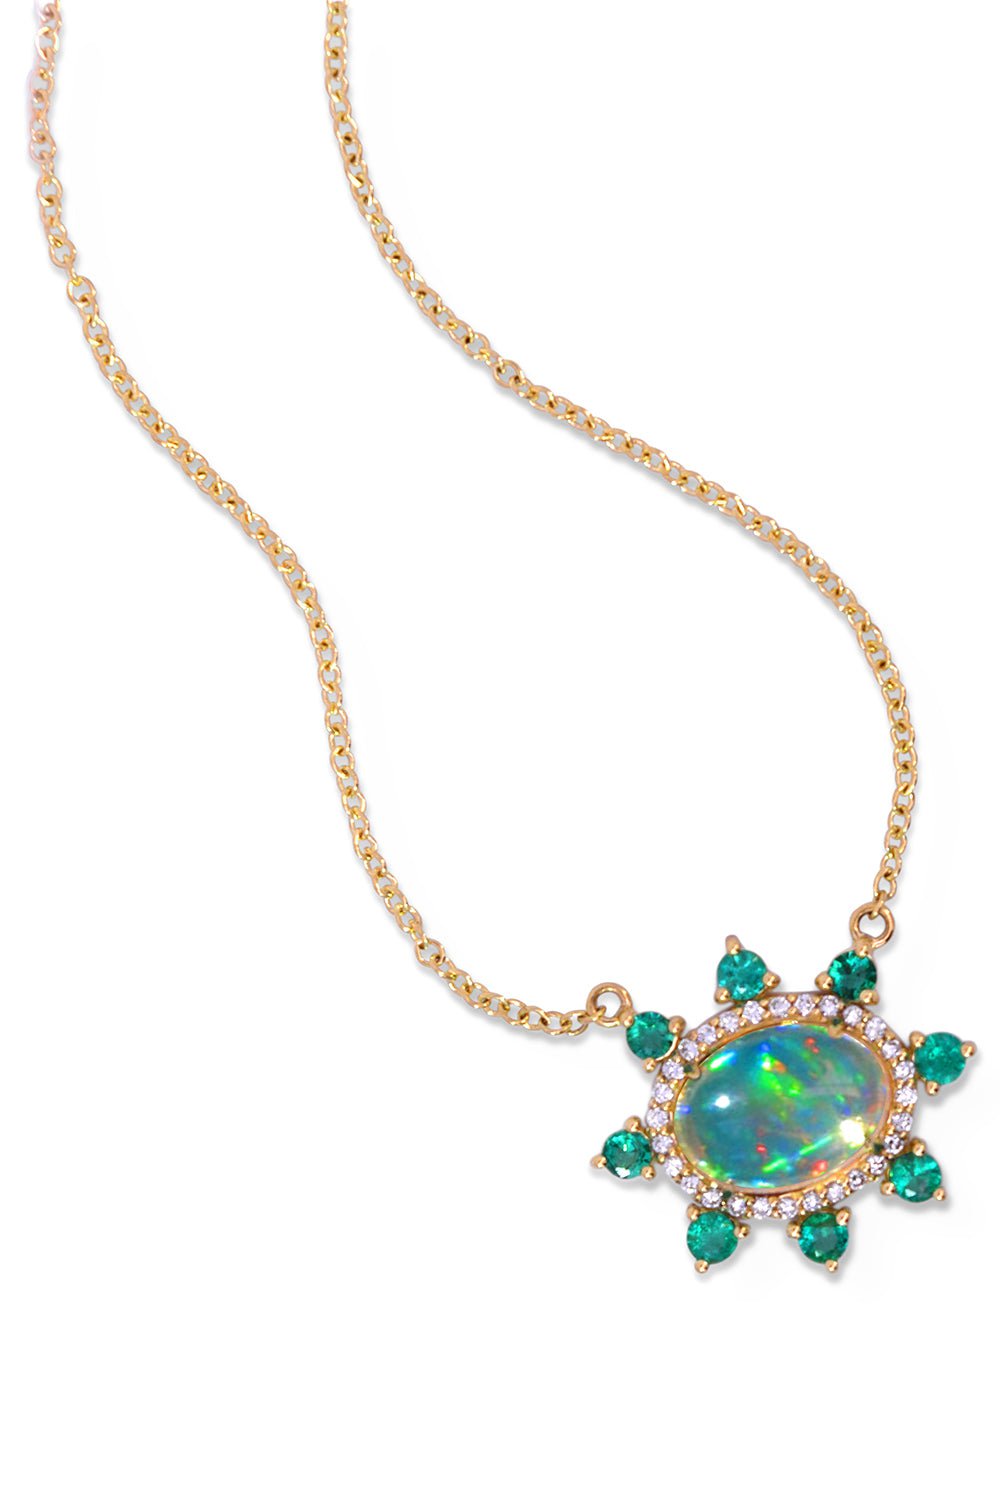 MONICA RICH KOSANN-Special Edition Mexican Water Opal Star Necklace-YELLOW GOLD